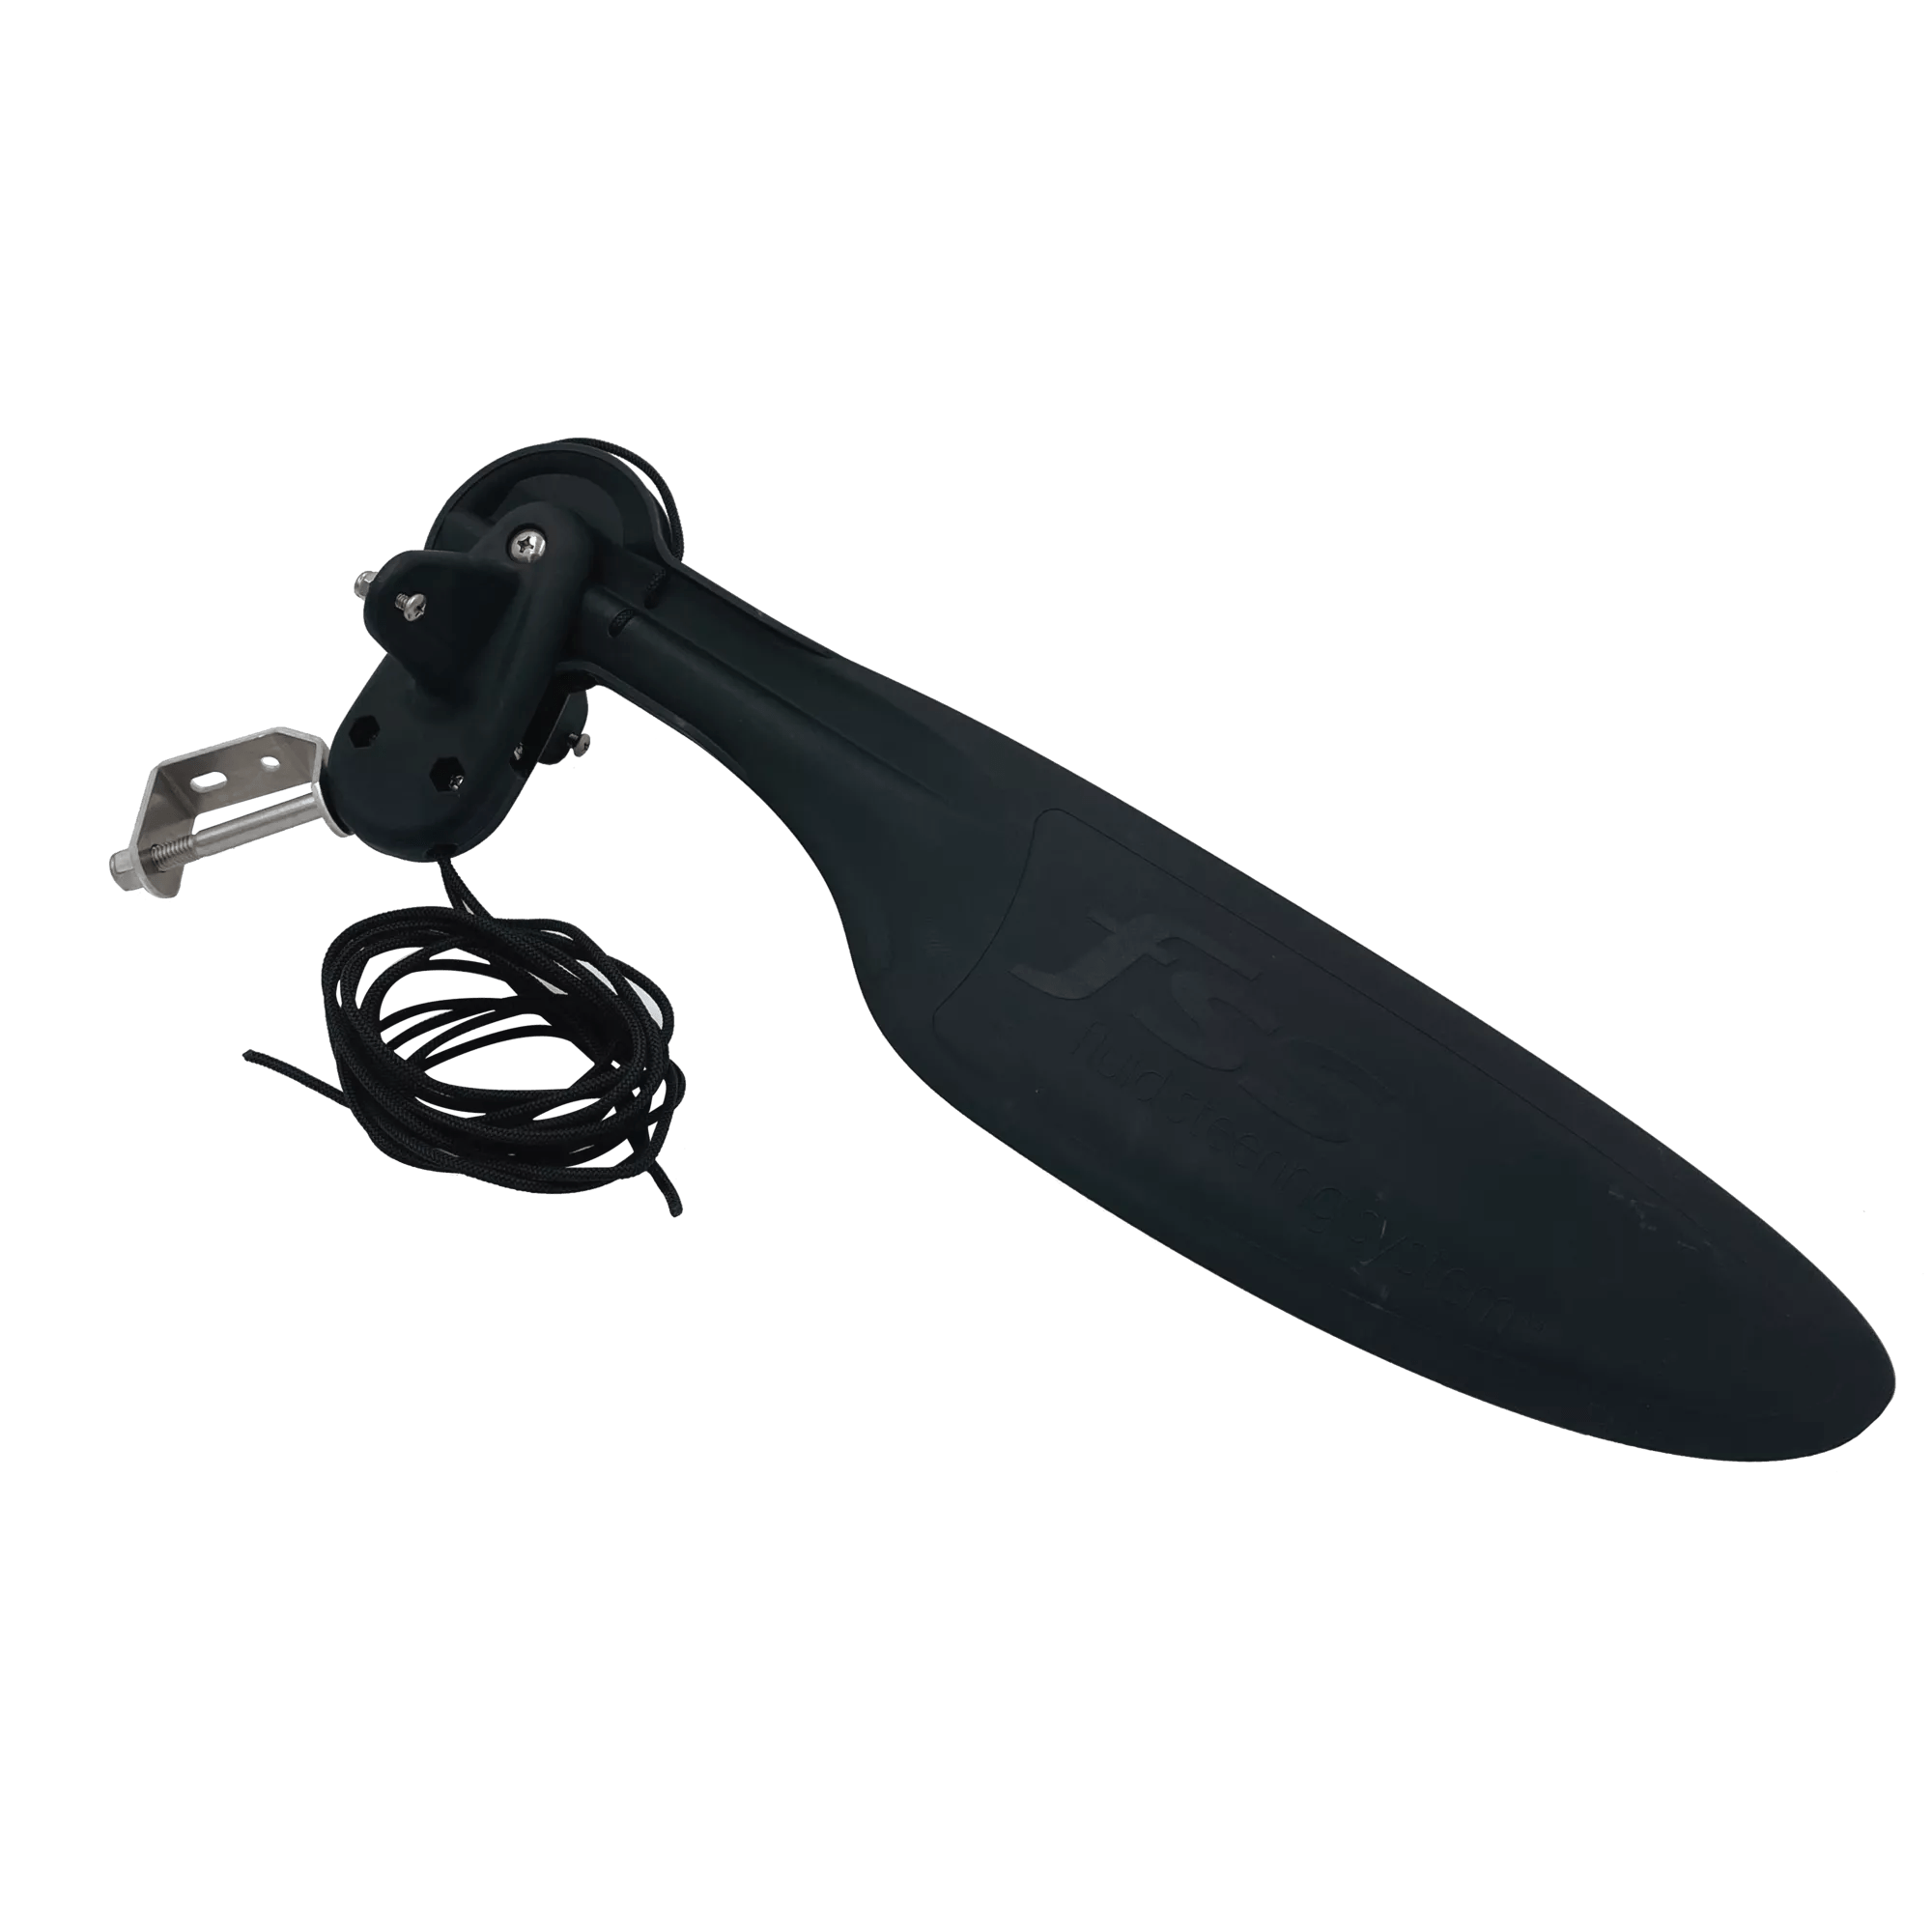 PELICAN - Rudder Assembly Including Deployment Cord for 14' Day Touring Kayak -  - PS1050 - ISO